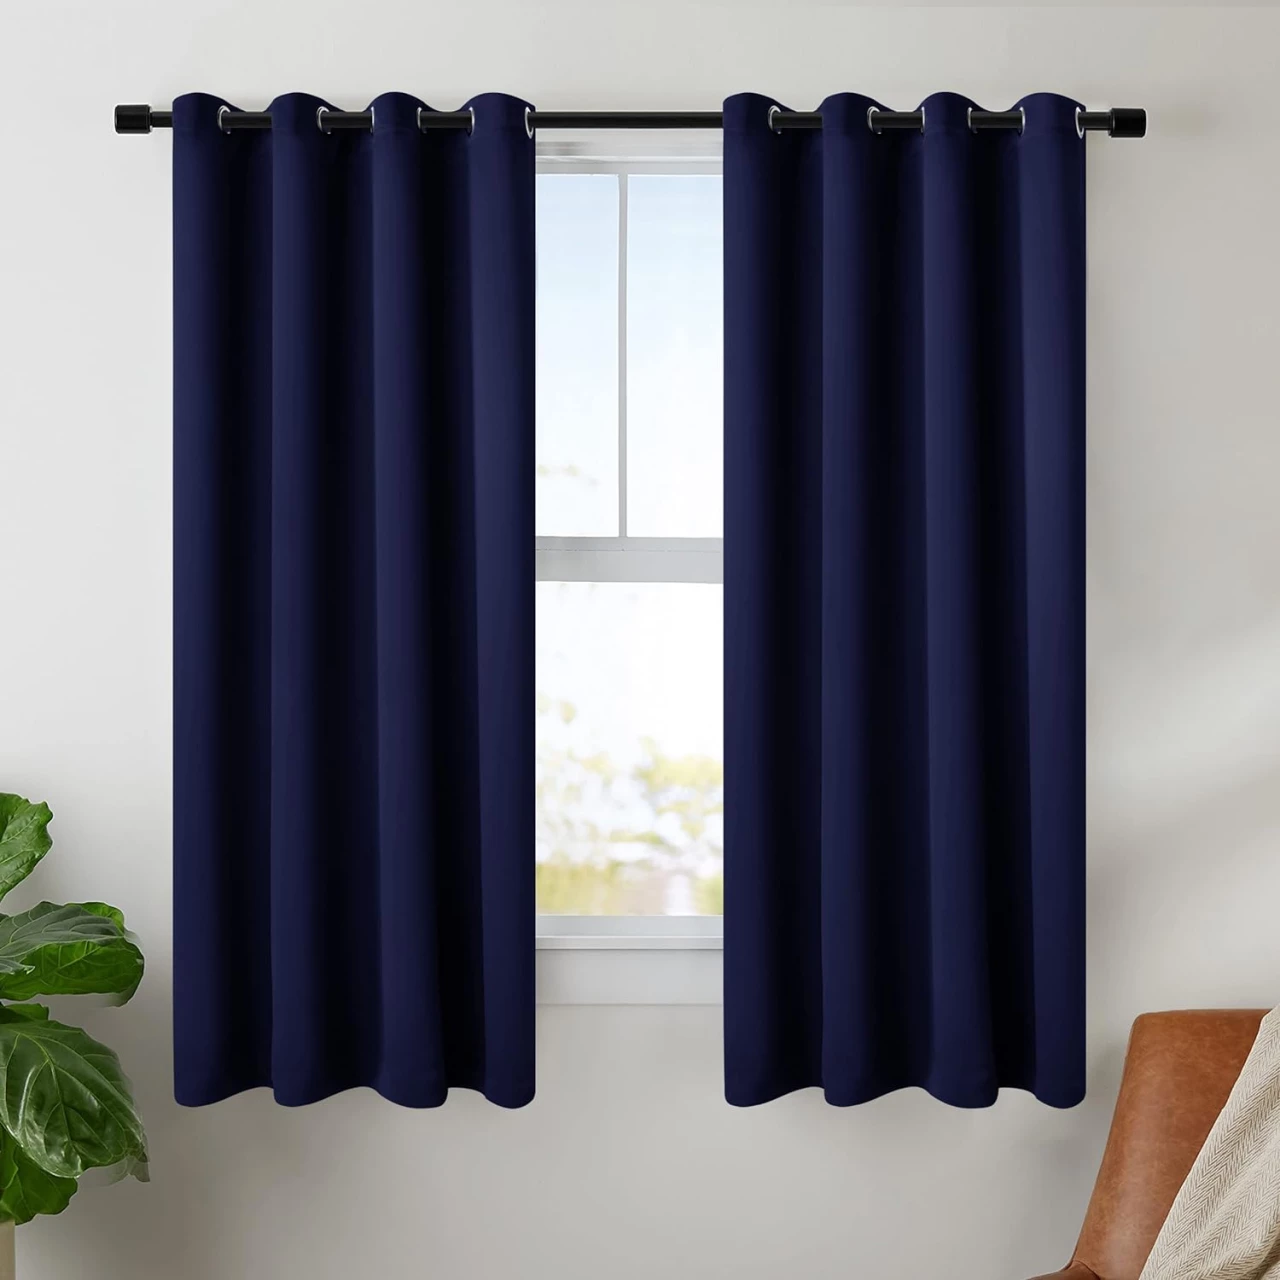 BONZER Grommet Blackout Curtains for Bedroom - Thermal Insulated, Energy Efficient, Noise Reducing and Light Blocking, Room Darkening Curtains for Living Room, Navy, 50 x 45 inch, Set of 2 Panels